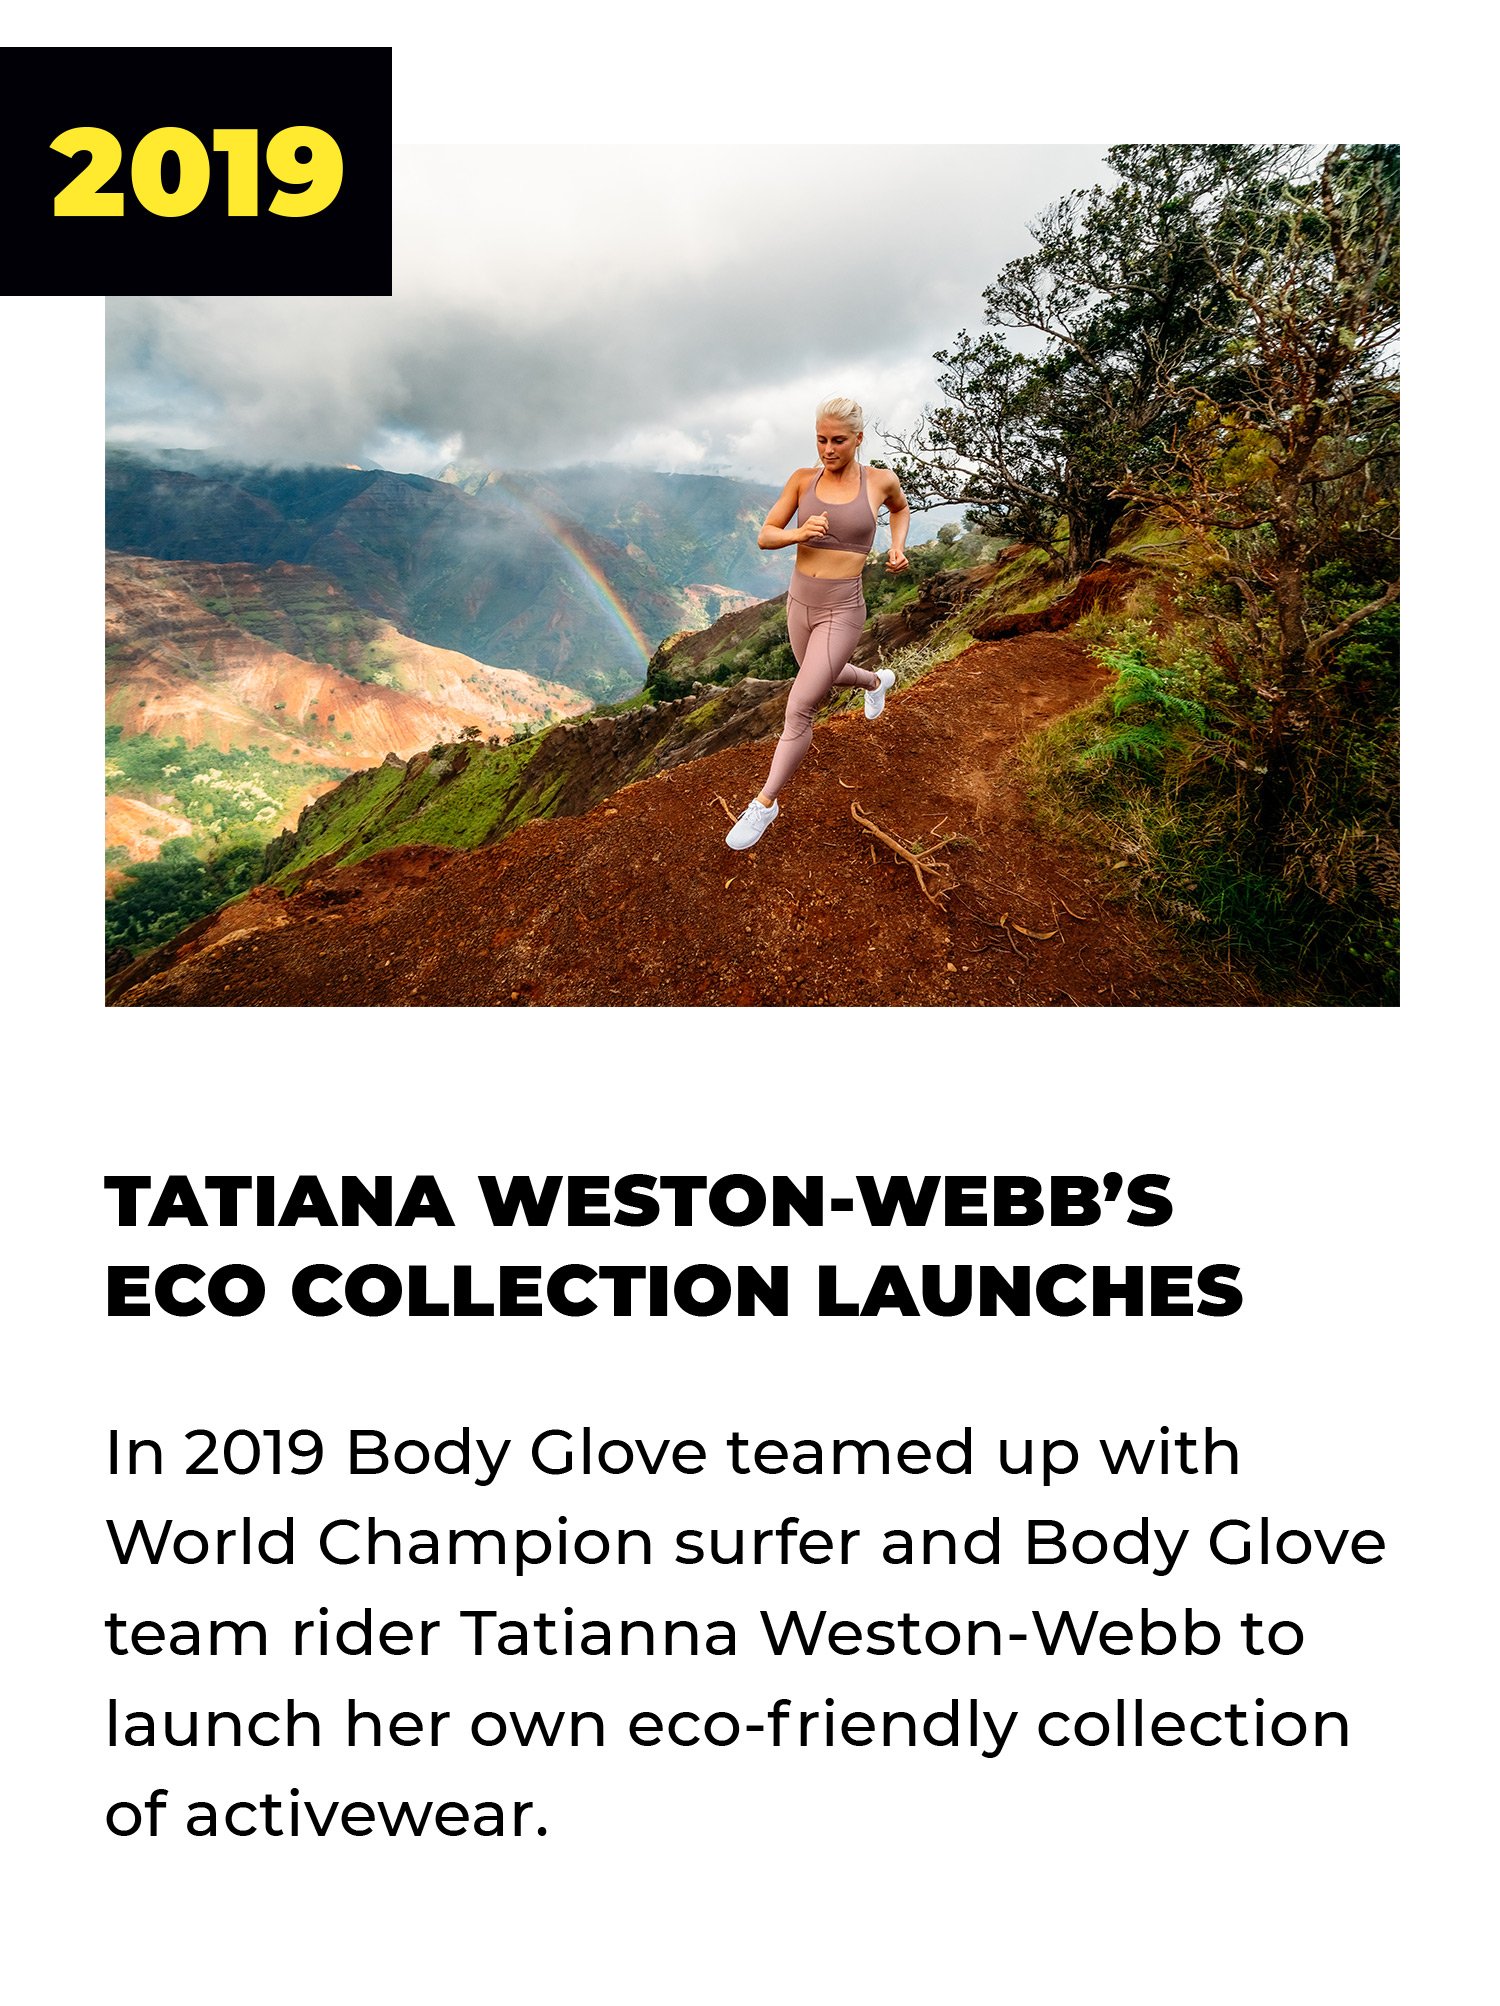 2019 | Tatiana Weston-Webb's Eco Collection Launches | In 2019 Body Glove teamed up with World Champion Surfer and Body Glove team rider Tatiana Weston-Webb to launch her own eco-friendly collection of activewear.